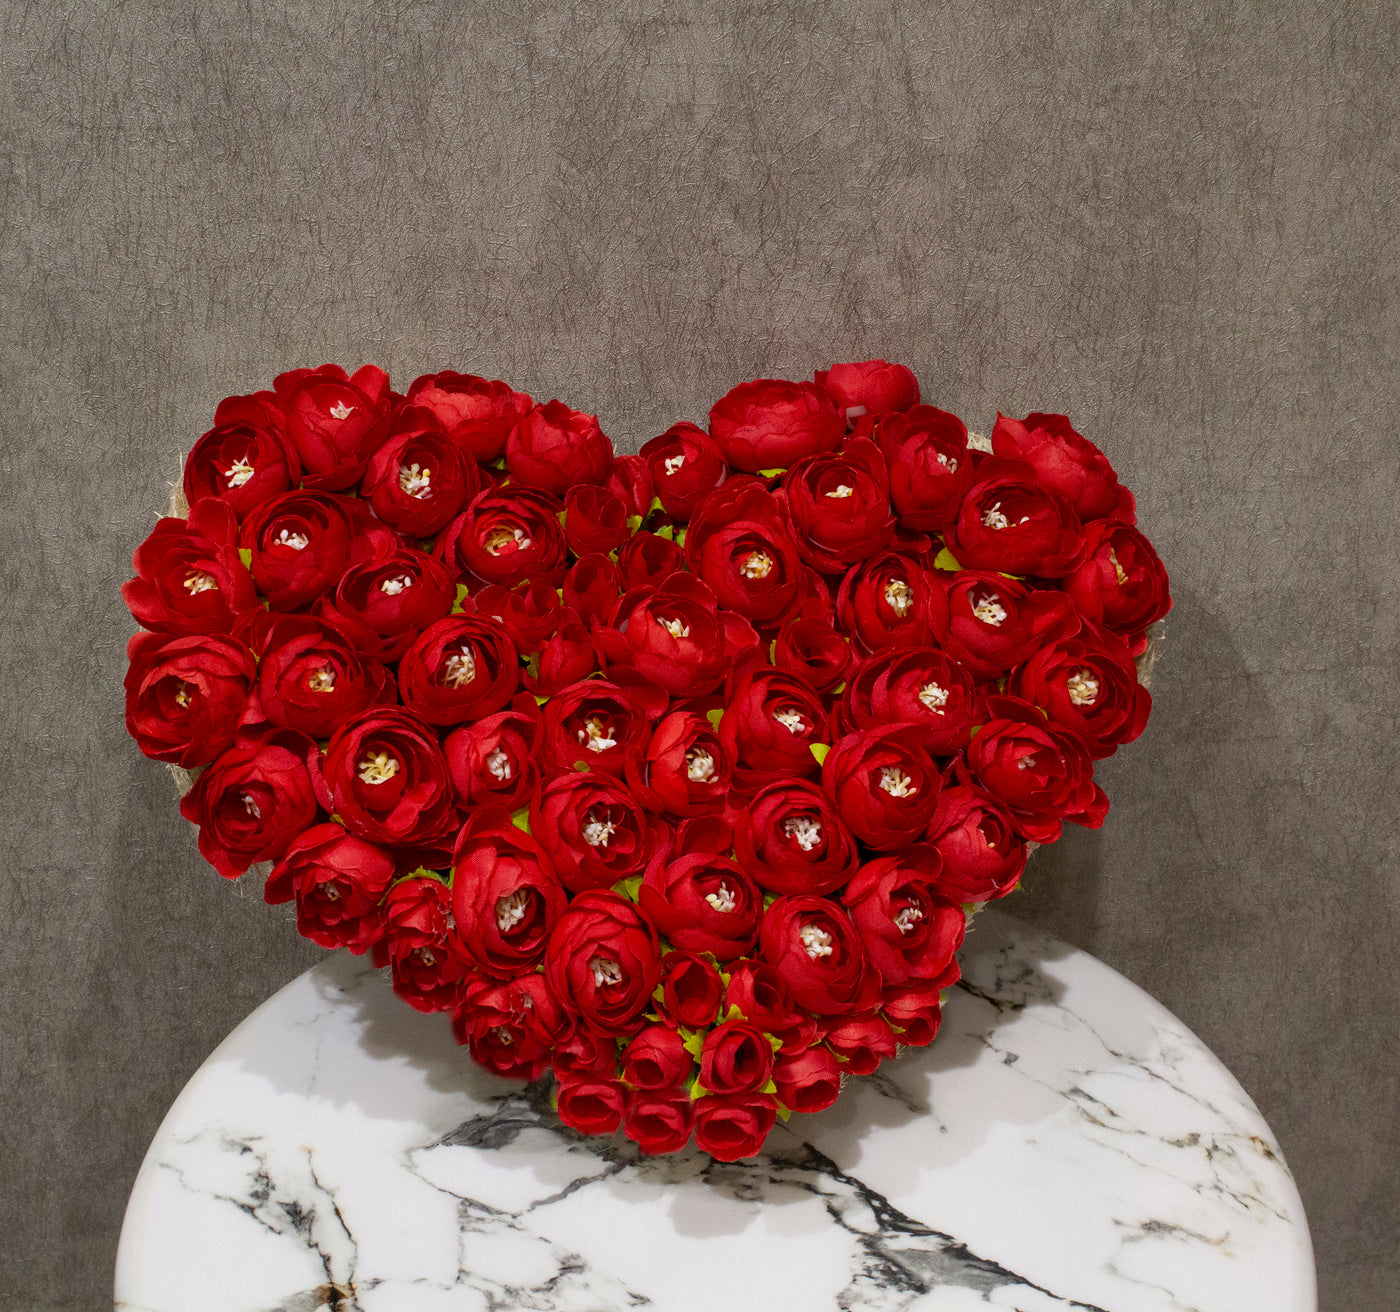 PolliNation Red Roses Heart Shape Bouquet For Valentine Gift